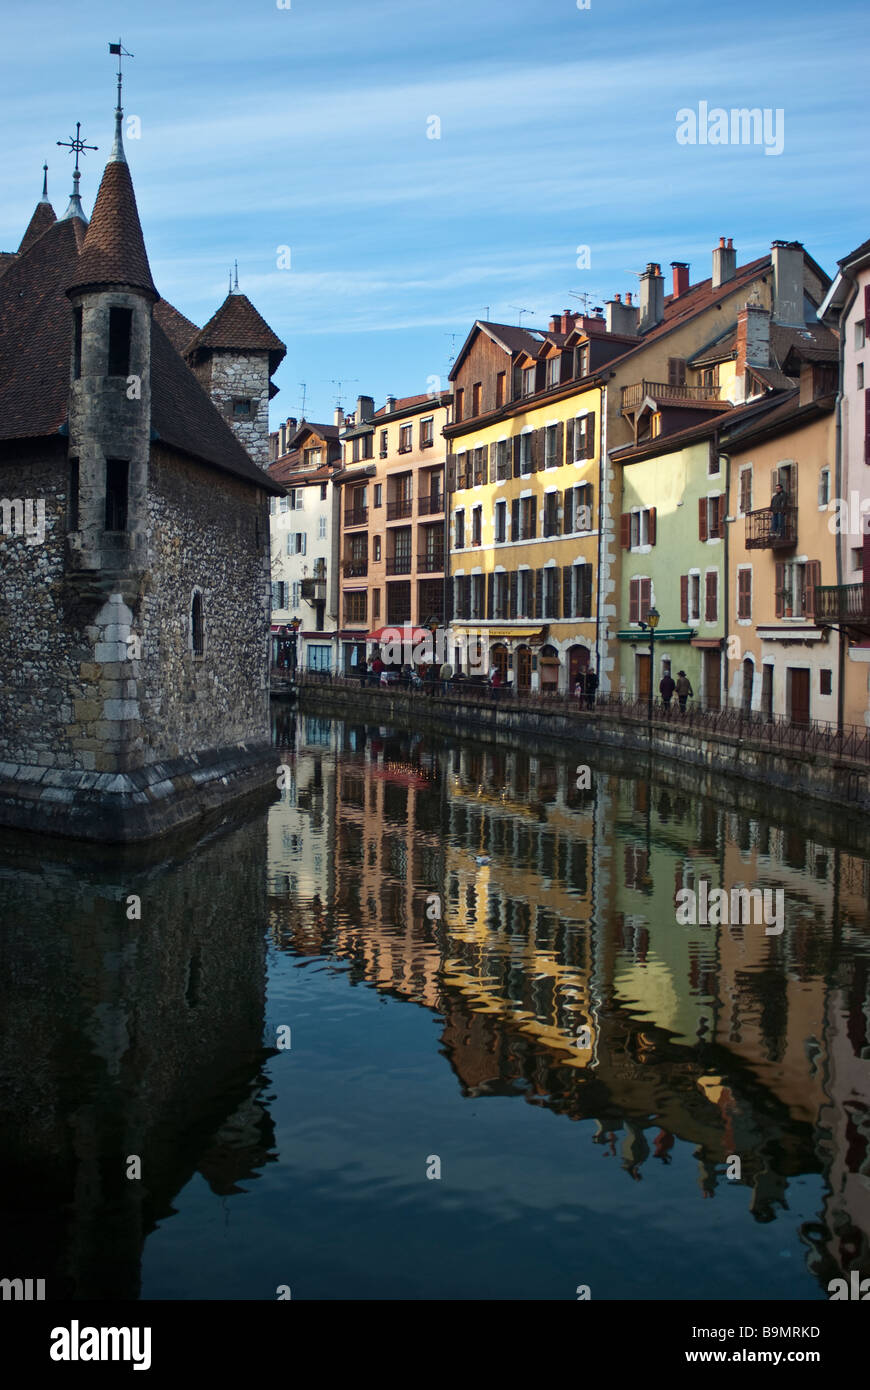 The old prison of Annecy, France, built in the 12th century surrounded by the local colorful houses; Stock Photo